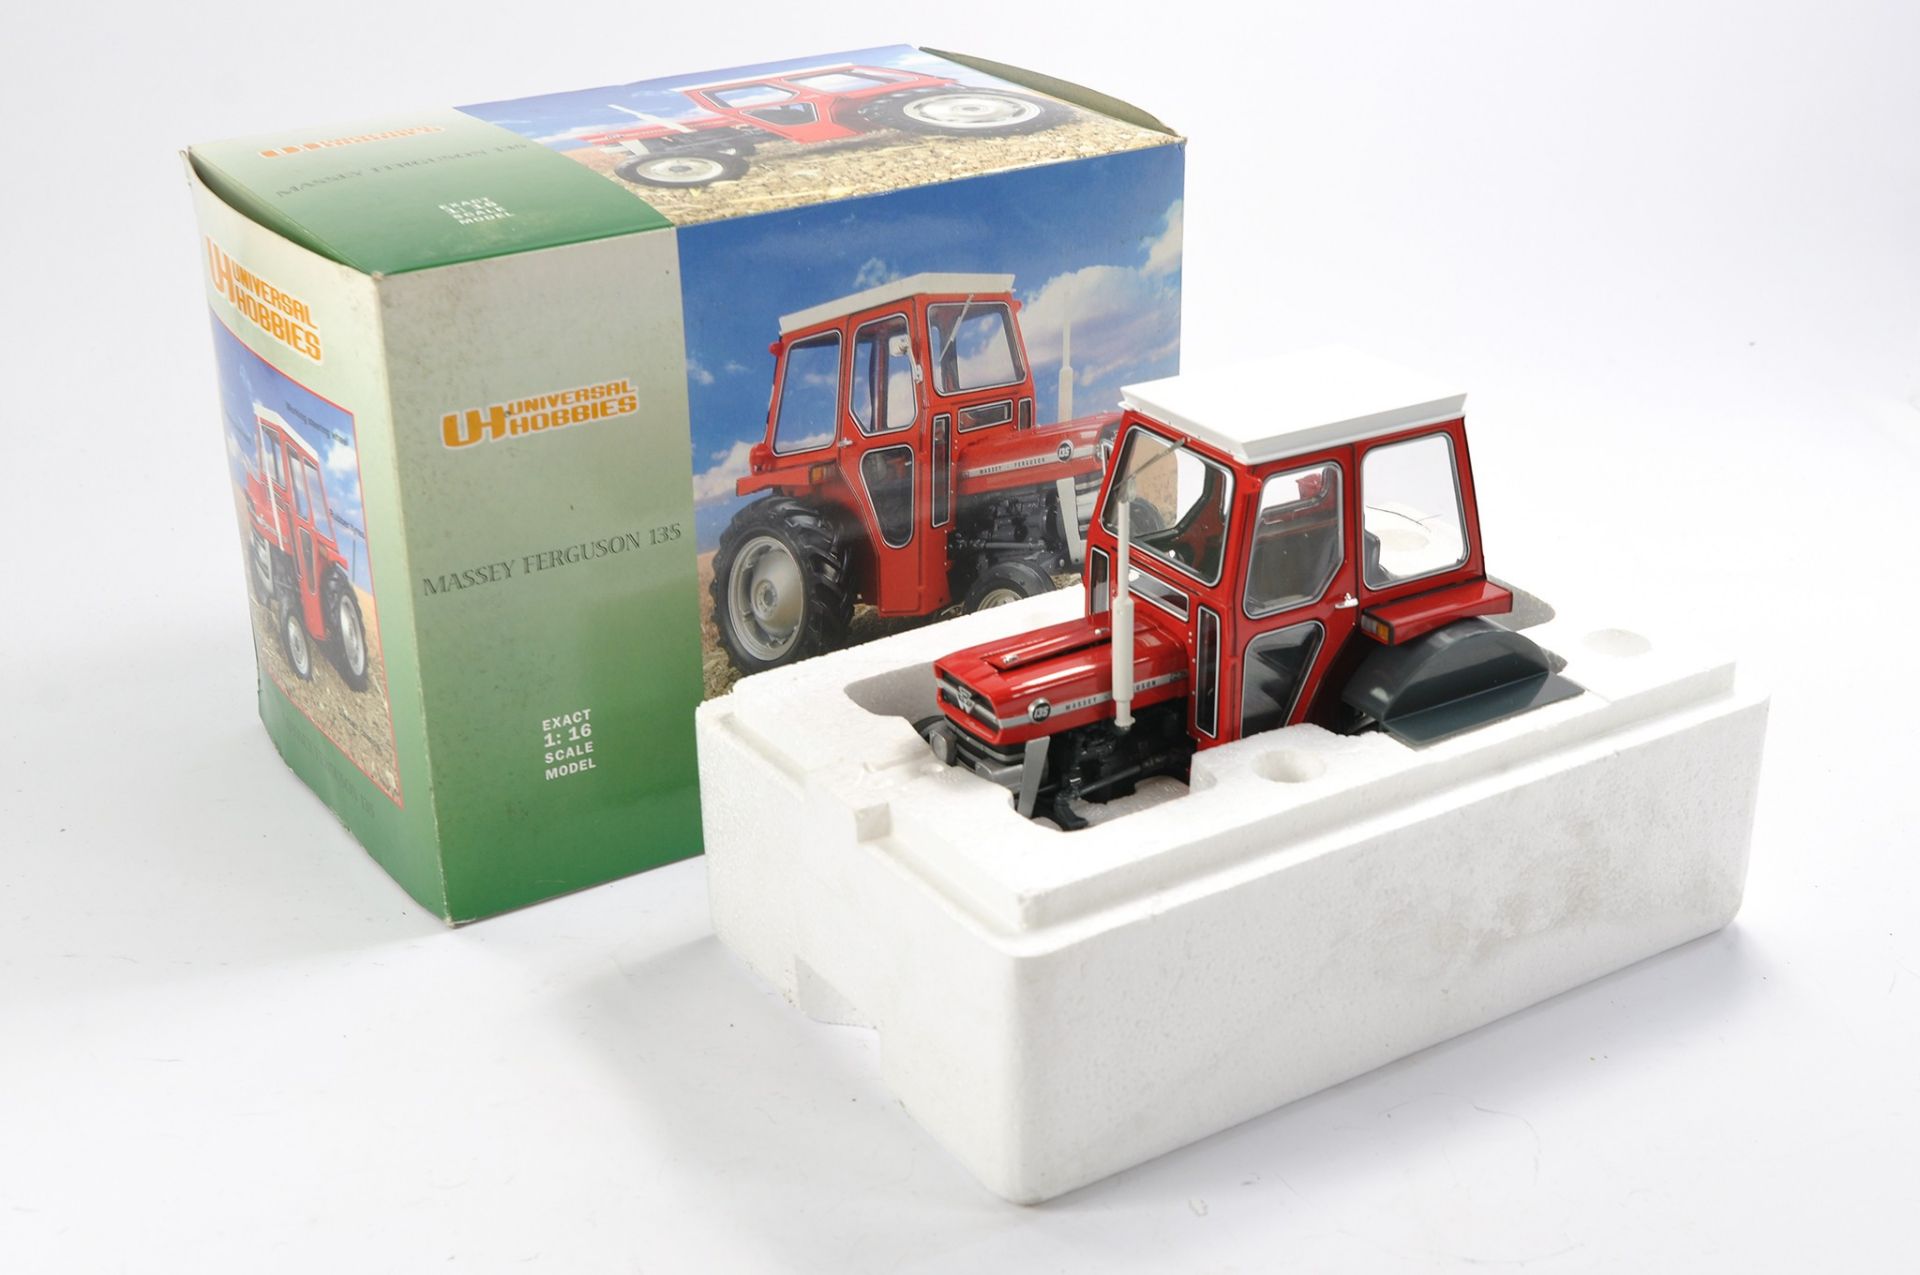 Universal Hobbies 1/16 Massey Ferguson 135 (with Cab) Tractor. Looks to be complete without